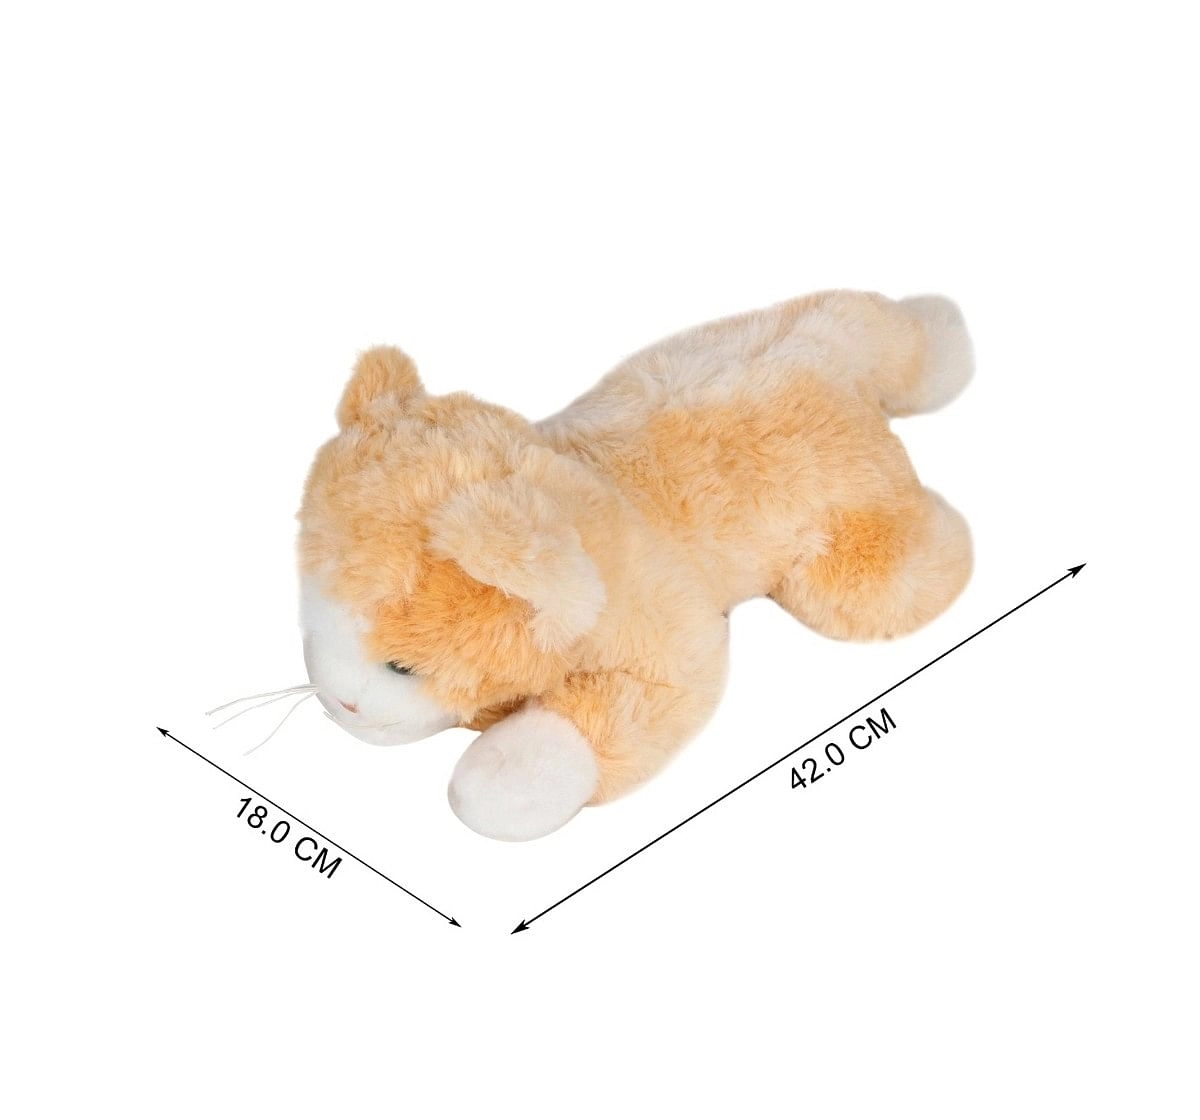 Cuddles Sleeping Cat 28 Cms Plush Toy for New Born Kids age 0M+ (Brown)